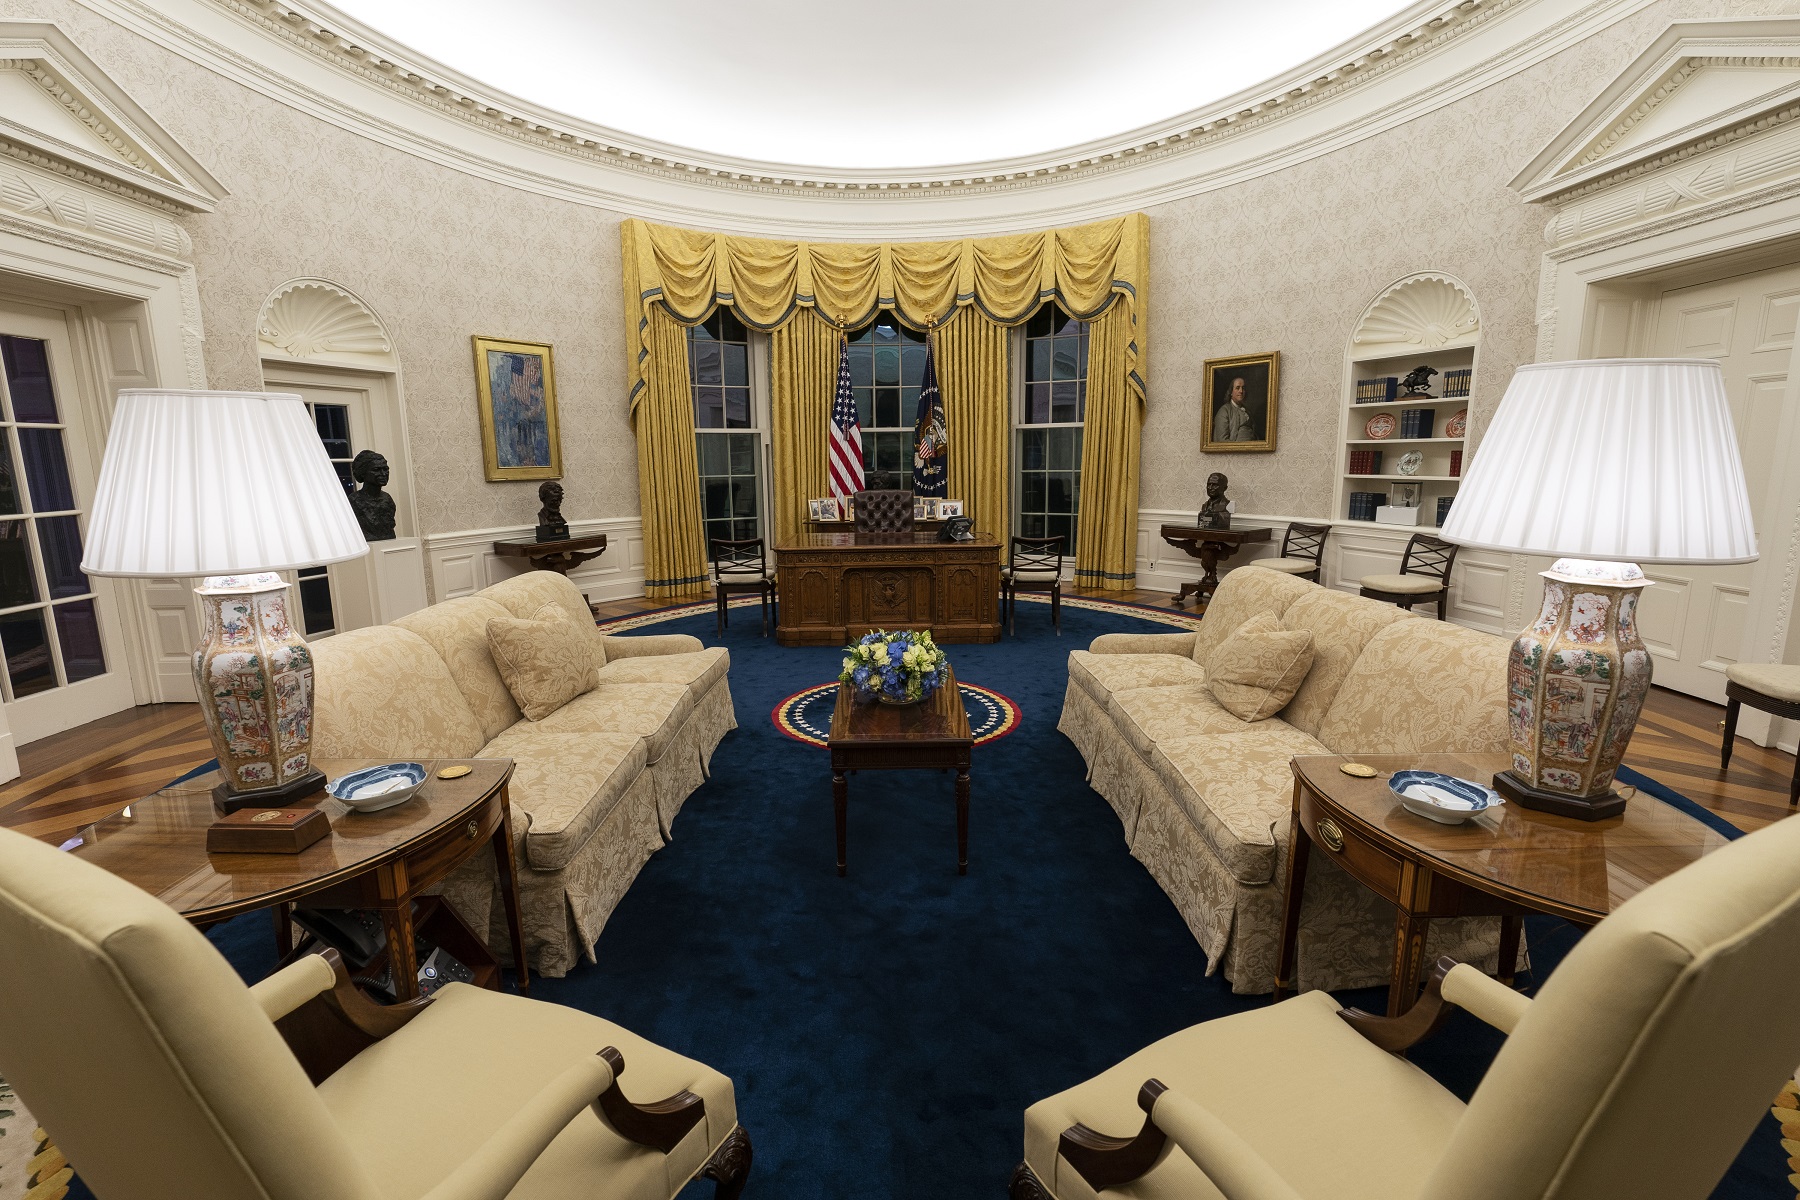 Joe Biden does some Oval Office redecoration | The Times of Israel